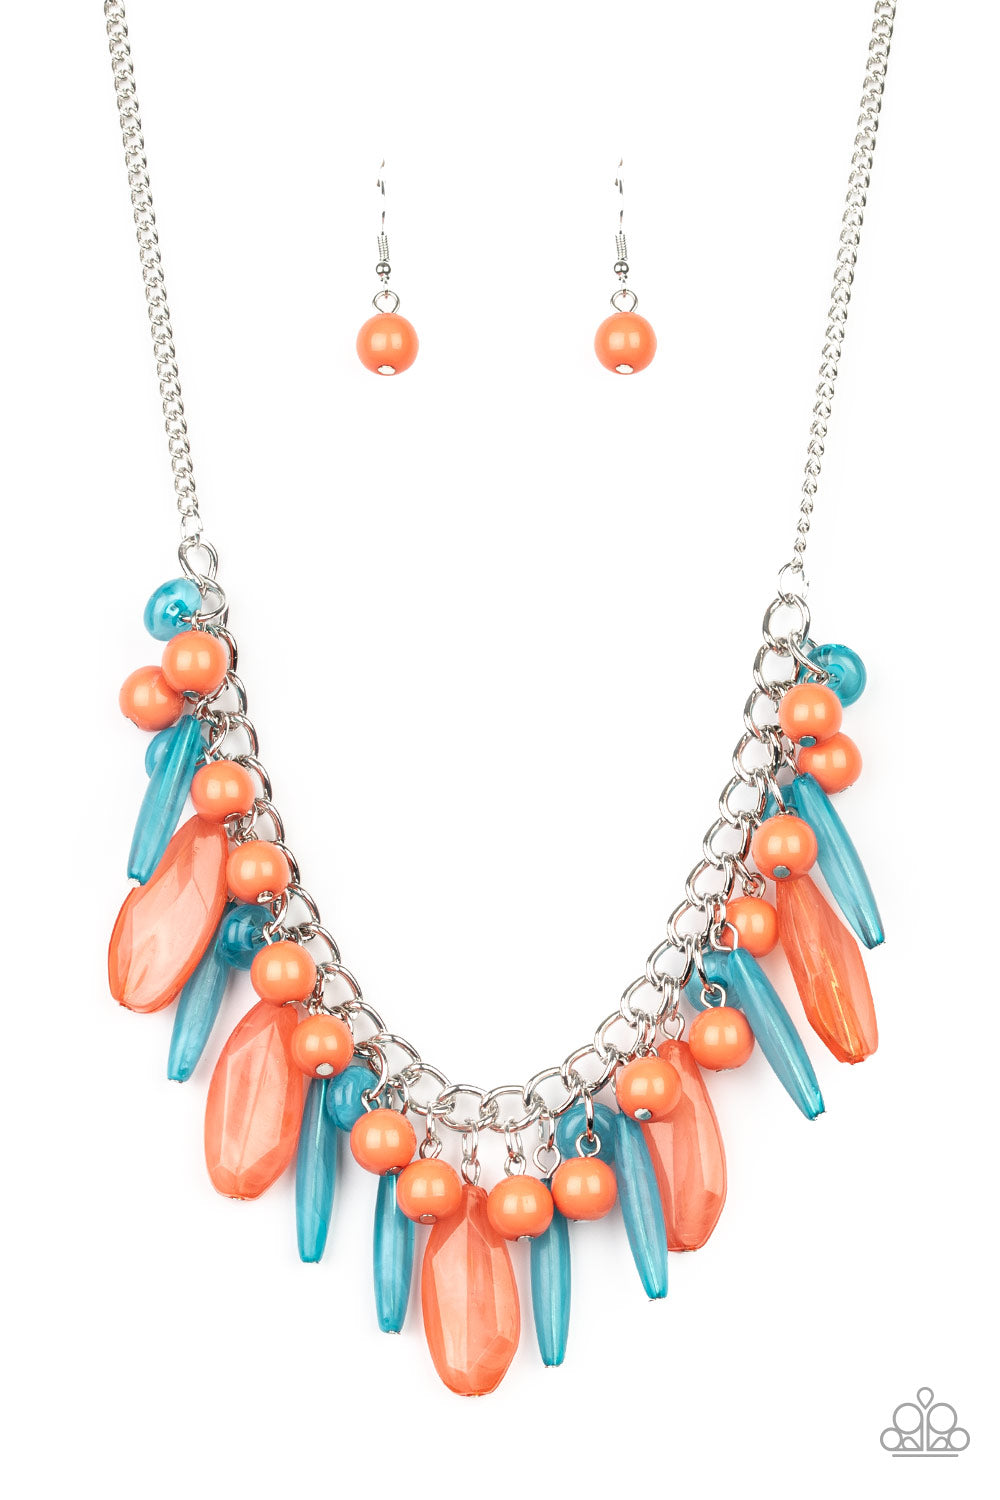 Paparazzi Miami Martinis - Multi - Opaque Blue and Coral Beads - Necklace & Earrings - $5 Jewelry with Ashley Swint